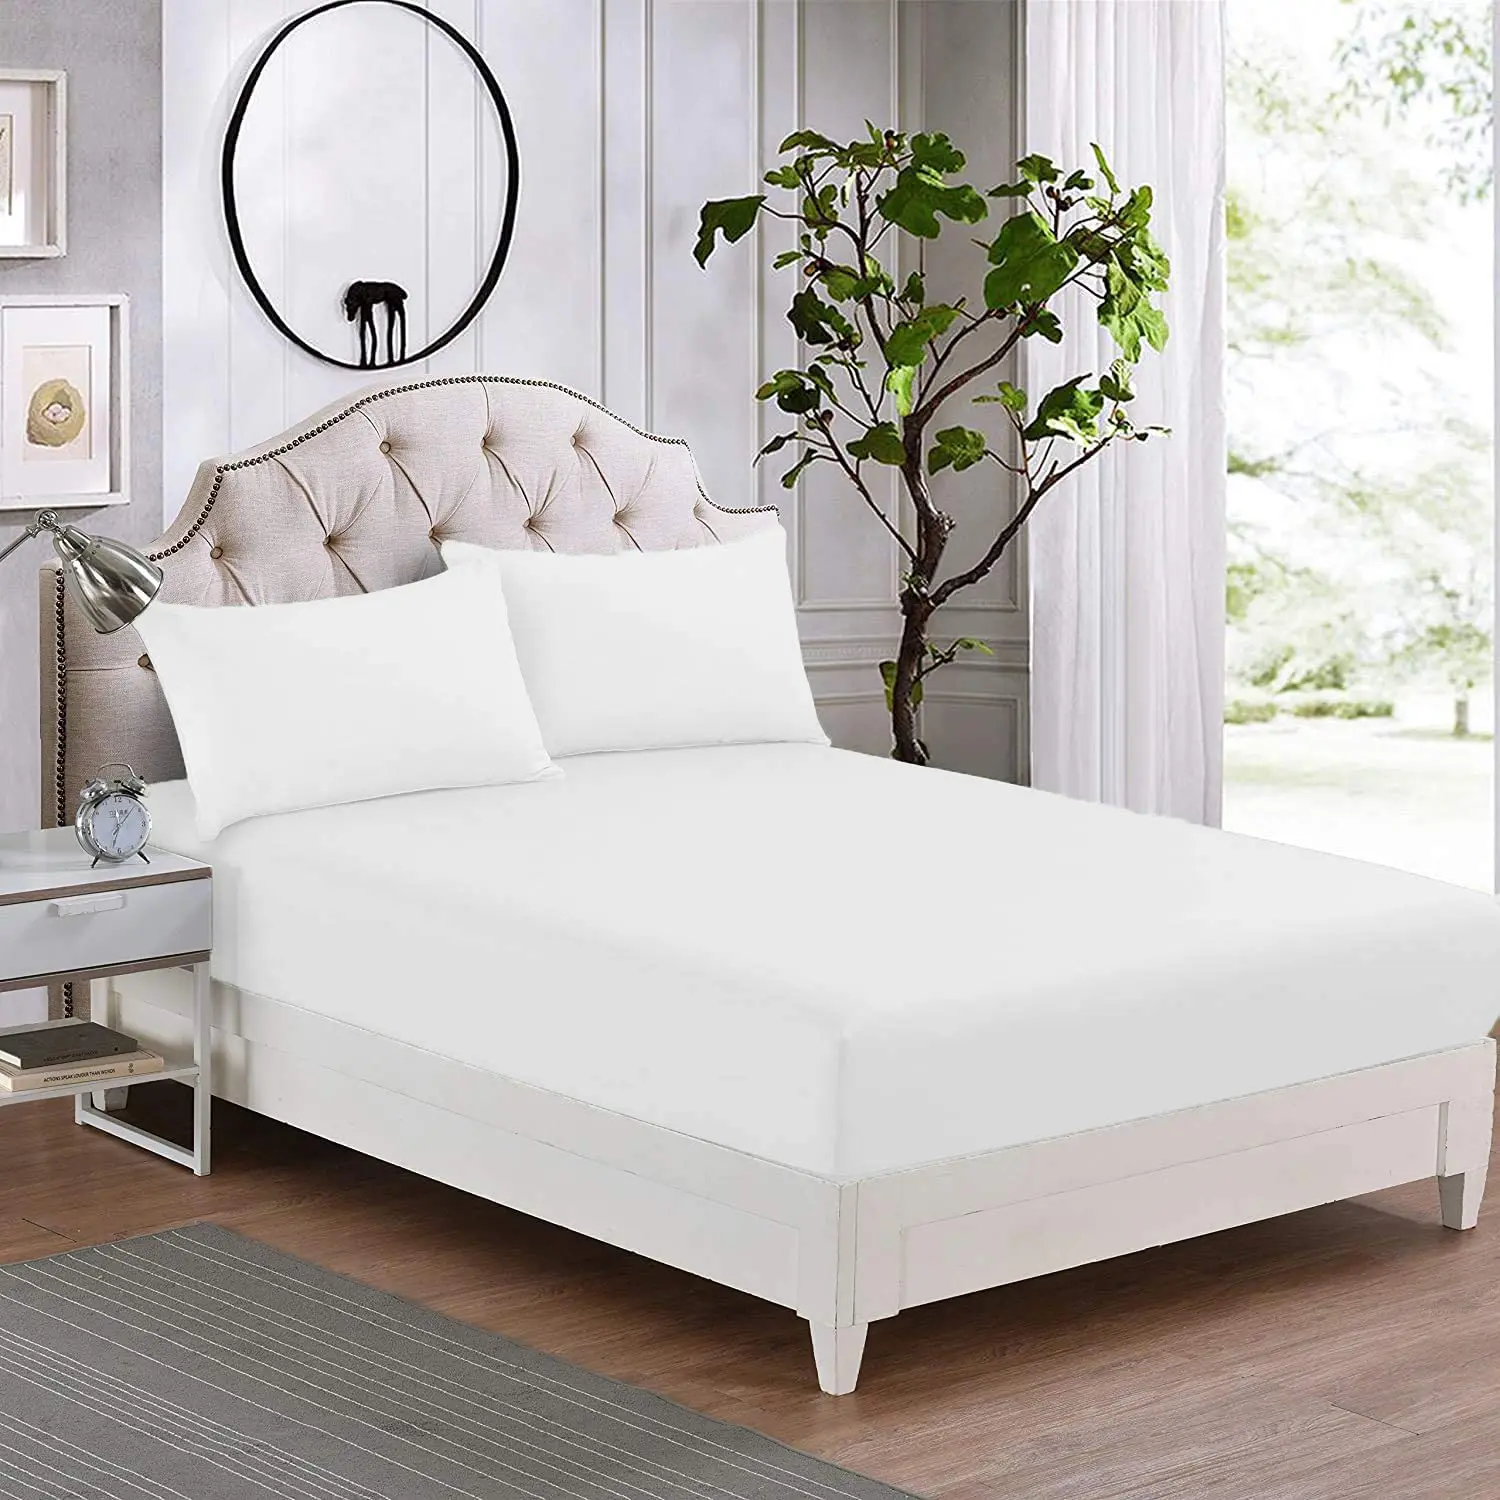 China Factory Wholesales OEM cheap high Quality 100% cotton polycotton king size white fitted bed sheet for hotel